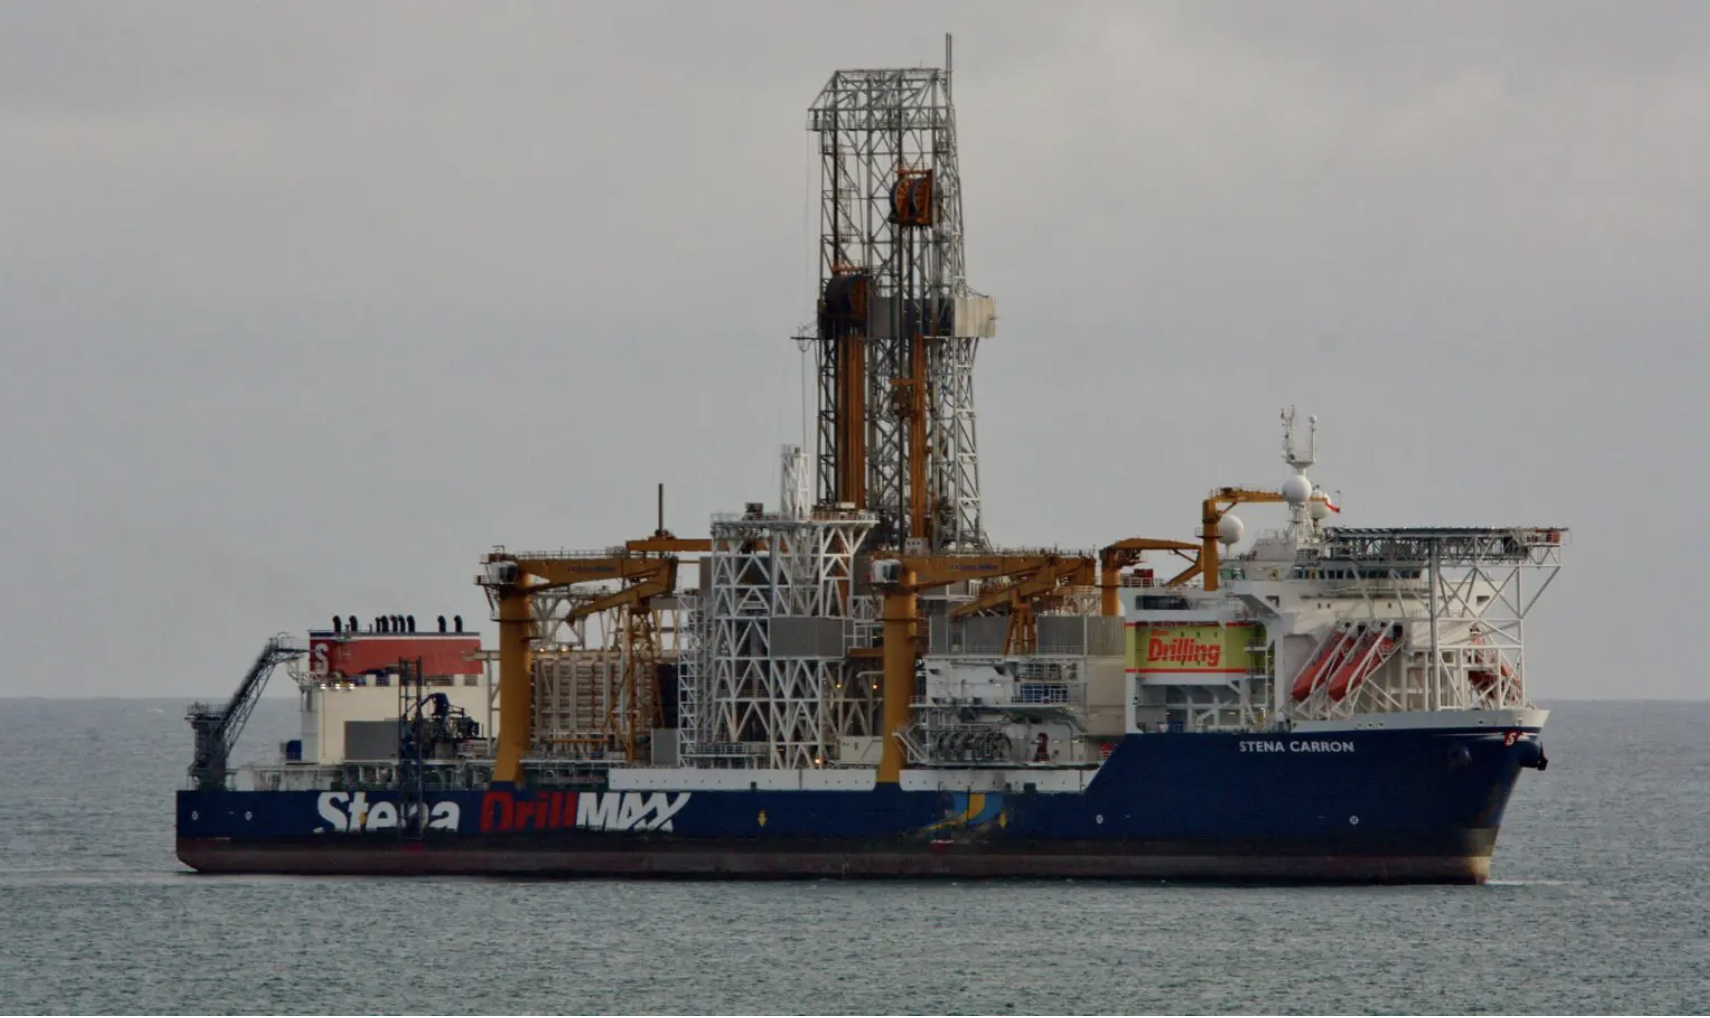 The drillship Stena Carron, seen in 2014, is currently operating in waters off Guyana's coast, part of ExxonMobil's efforts to find new oil reserves despite the ongoing energy transition. Credit: Ronnie Robertson, CC BY-SA 2.0